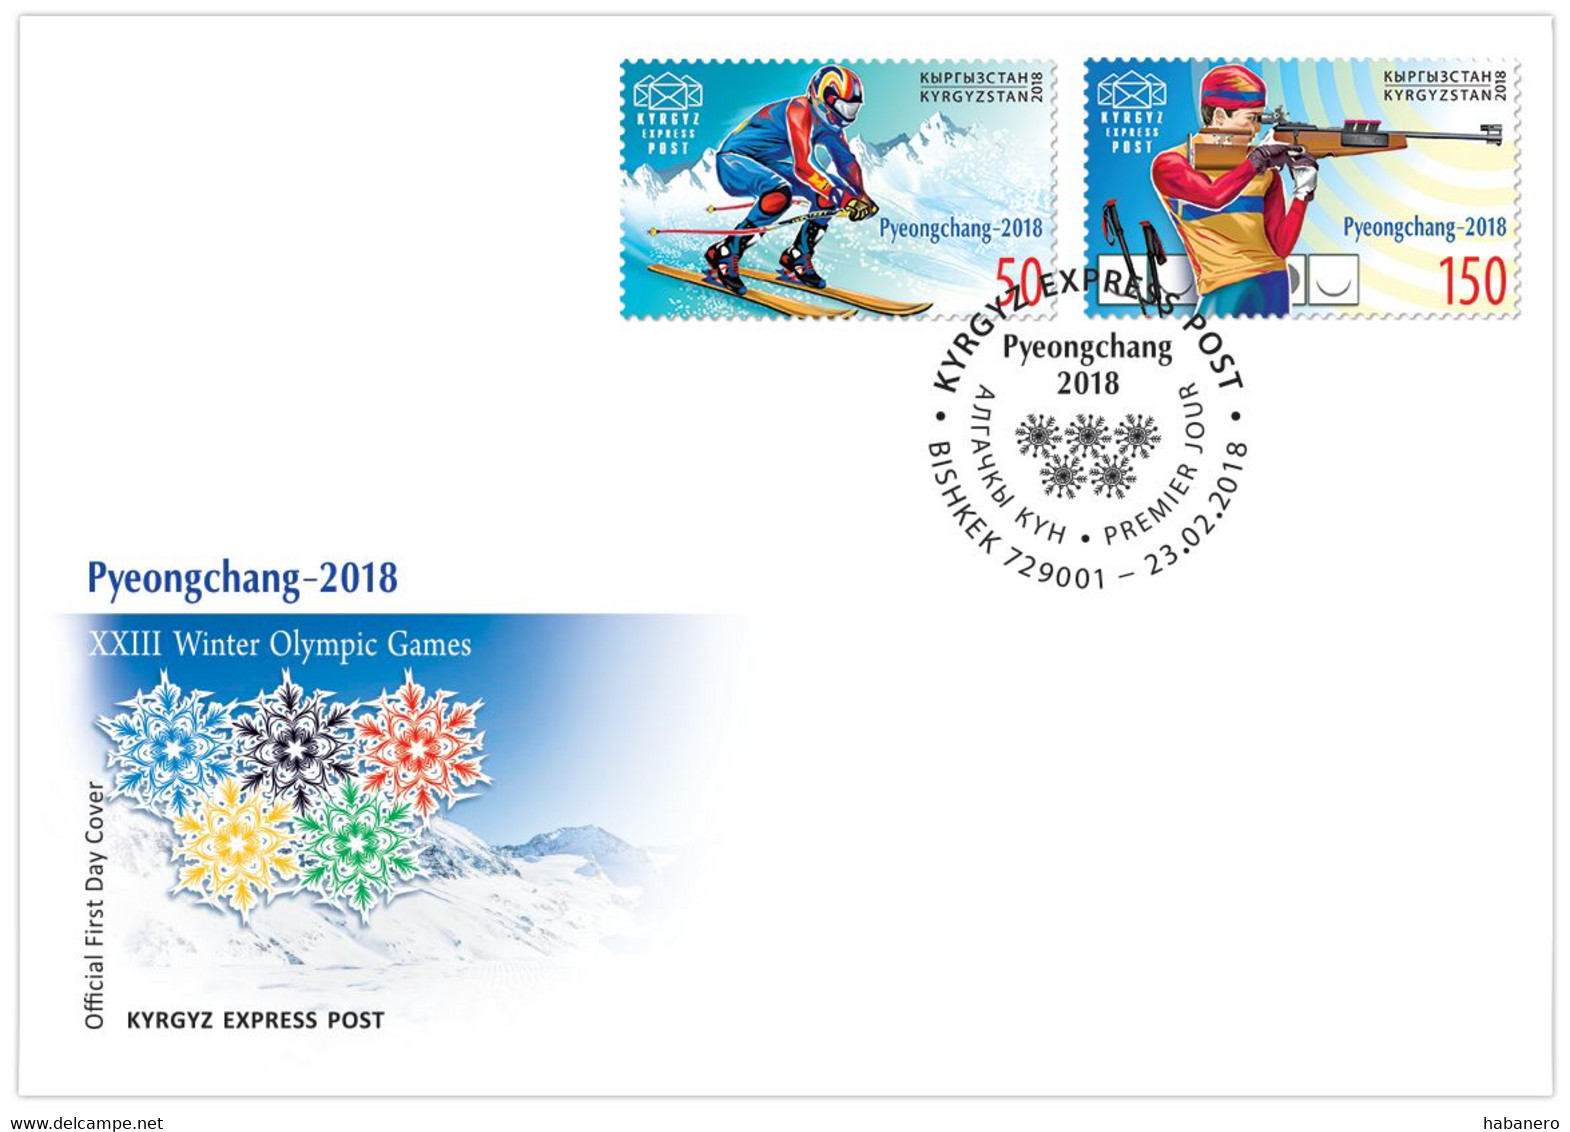 KYRGYZSTAN 2018 KEP 91-92 PYEONGCHANG OLYMPIC GAMES FDC - ONLY 400 ISSUED - Hiver 2018 : Pyeongchang